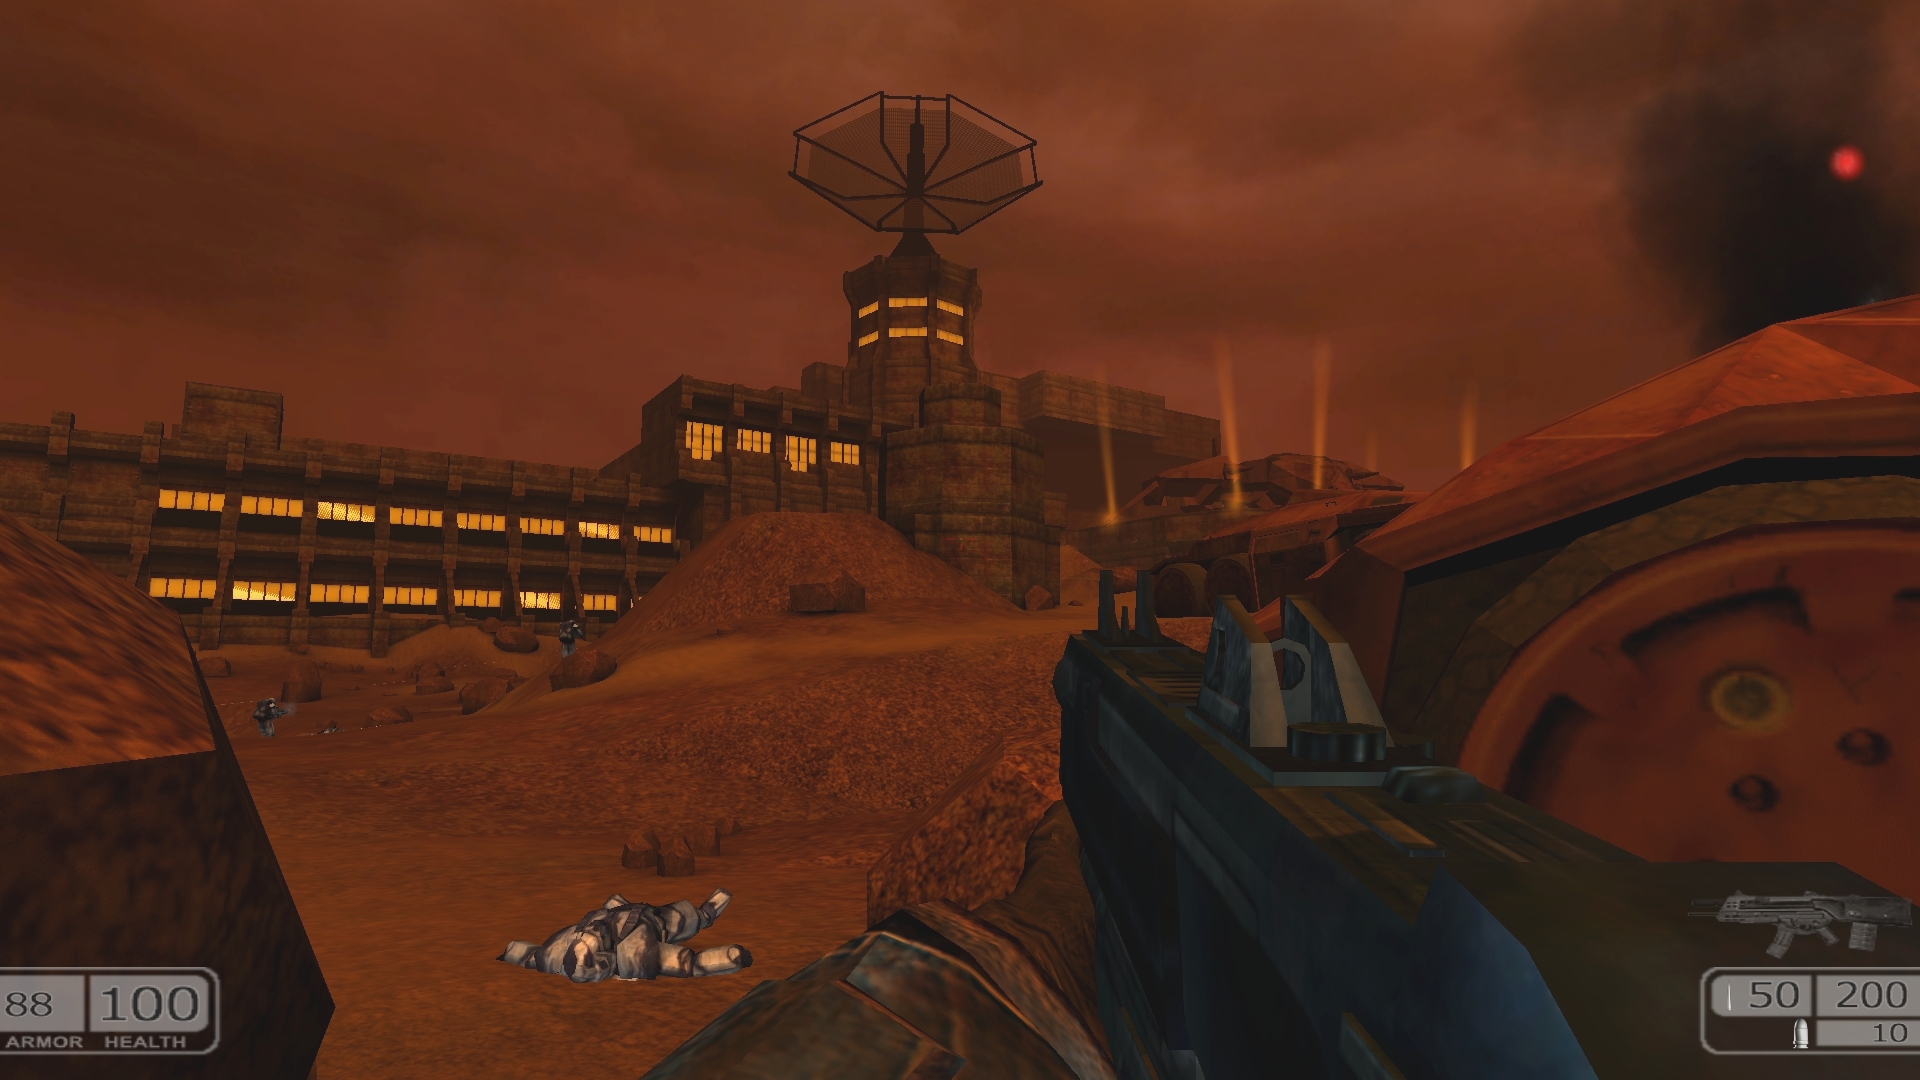 chaser_a_shooter_game_about_mars_screenshot_16.jpg